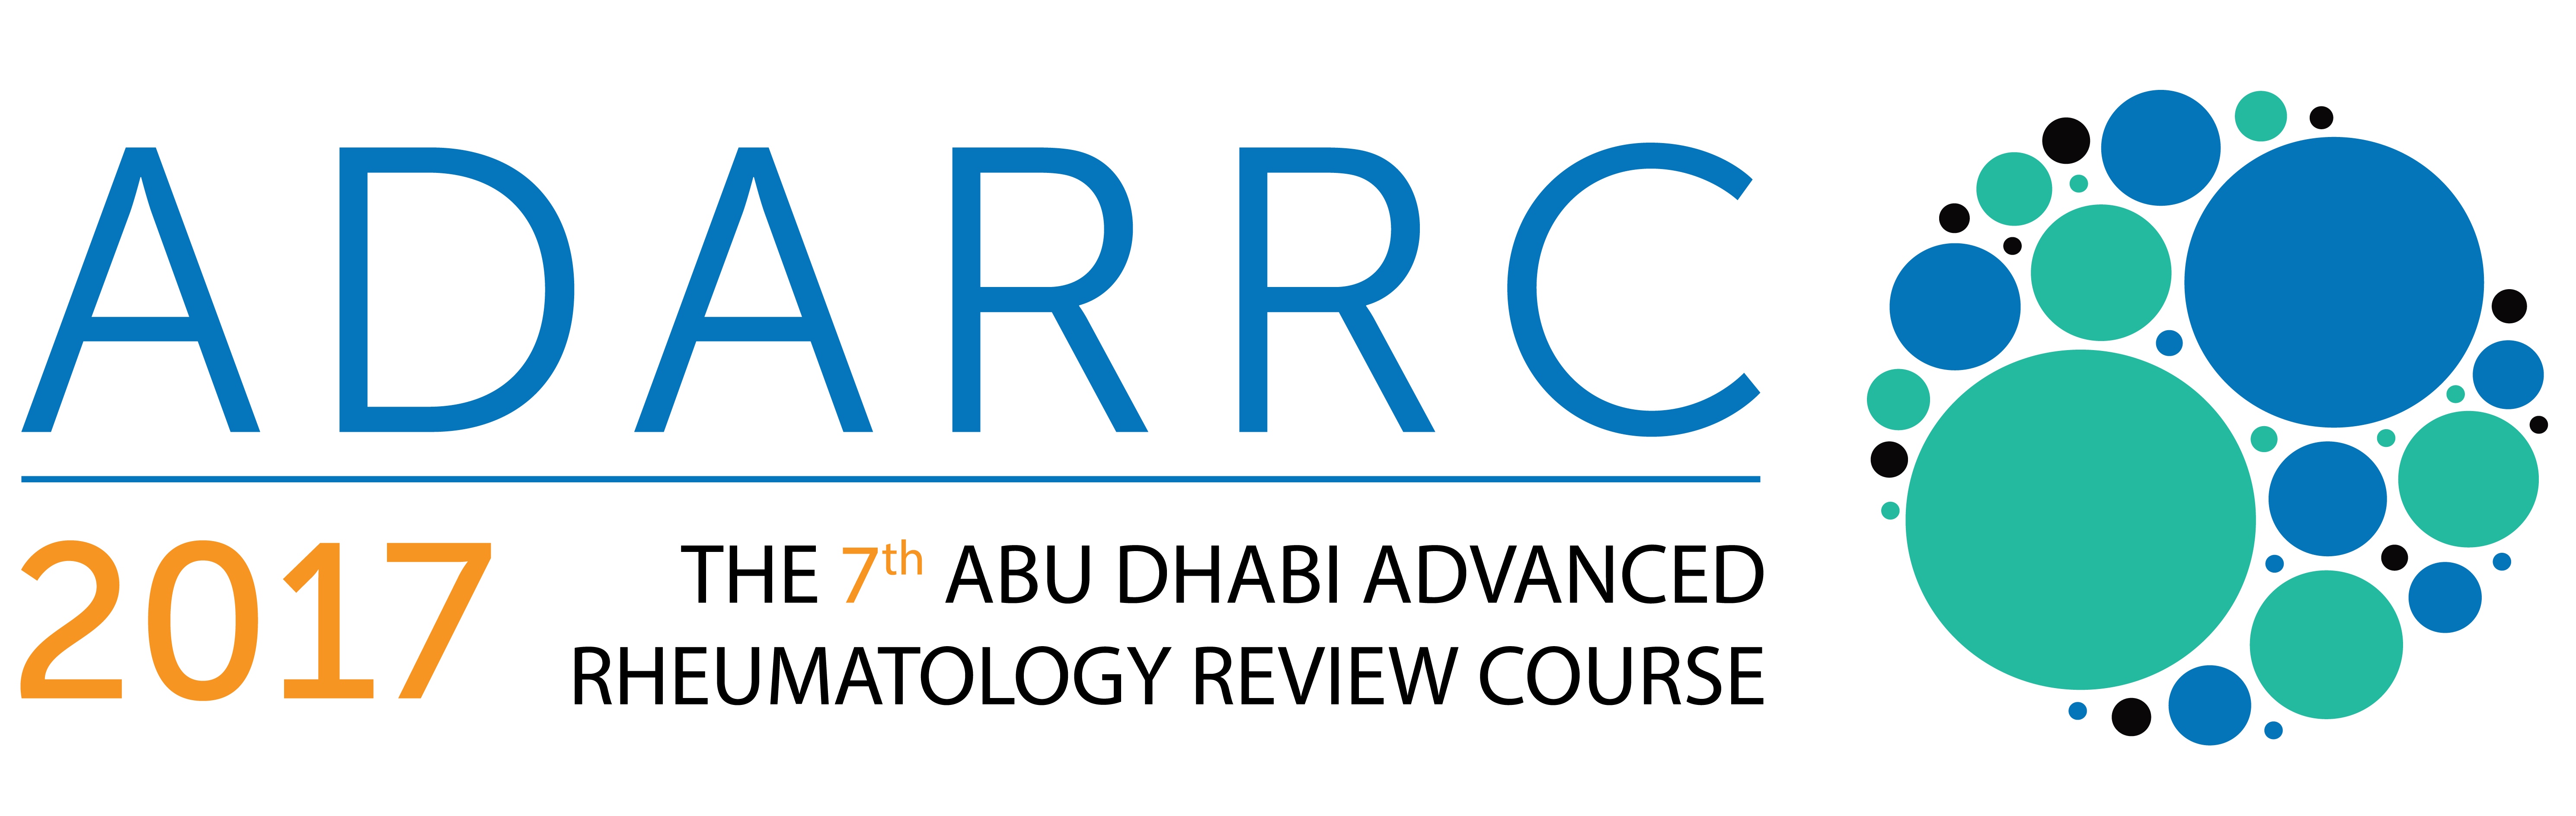 Abu Dhabi, the dynamic capital of the United Arab Emirates, will host the 7th Abu Dhabi Advanced Rheumatology Review Course (ADARRC) from 21-23 October, 2017.

This structured, postgraduate platform is designed as a one-stop shop for busy rheumatologists and rheumatologists-in-training. It is a scientific, educational program which brings together up to 20 of the world foremost, published experts in adult and paediatric rheumatology to share their latest insights, research findings and case studies, through an intensive series of lectures and workshops.